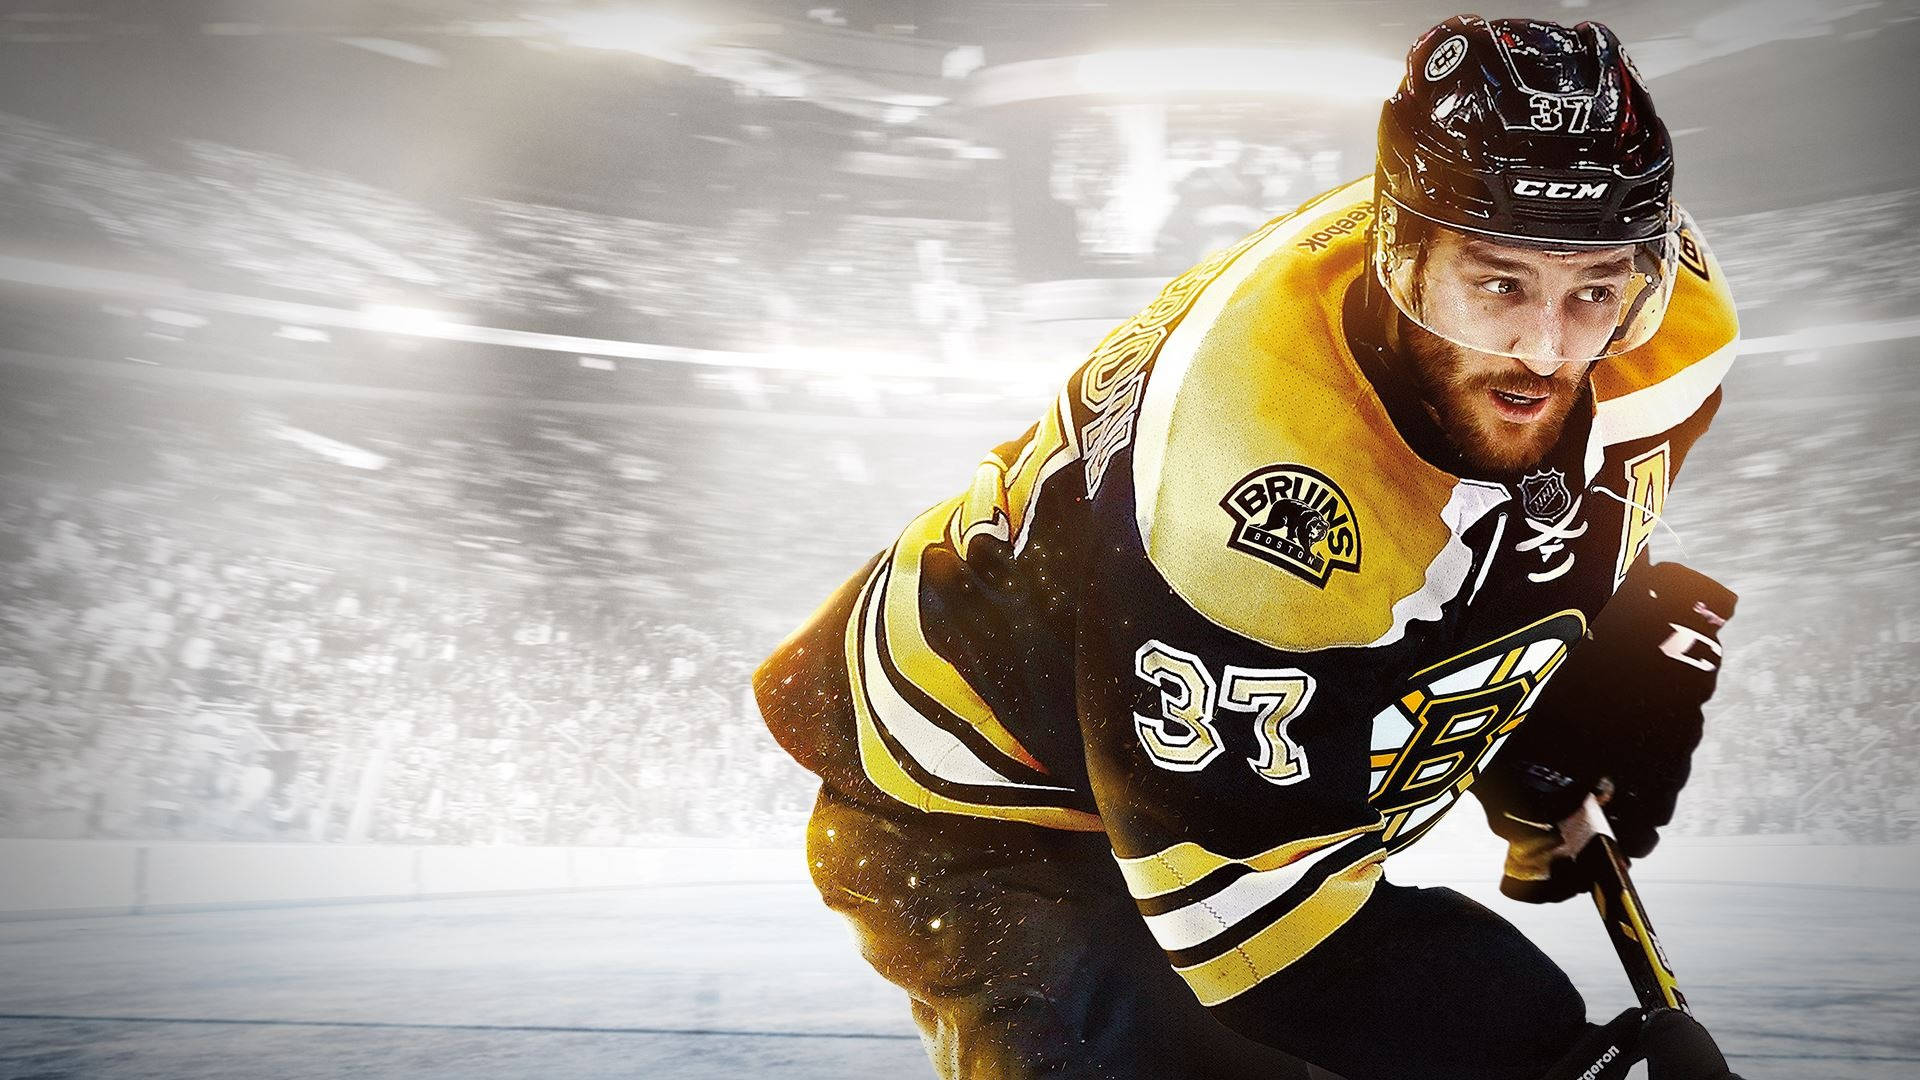 Take to the Ice with Cool Hockey! Wallpaper